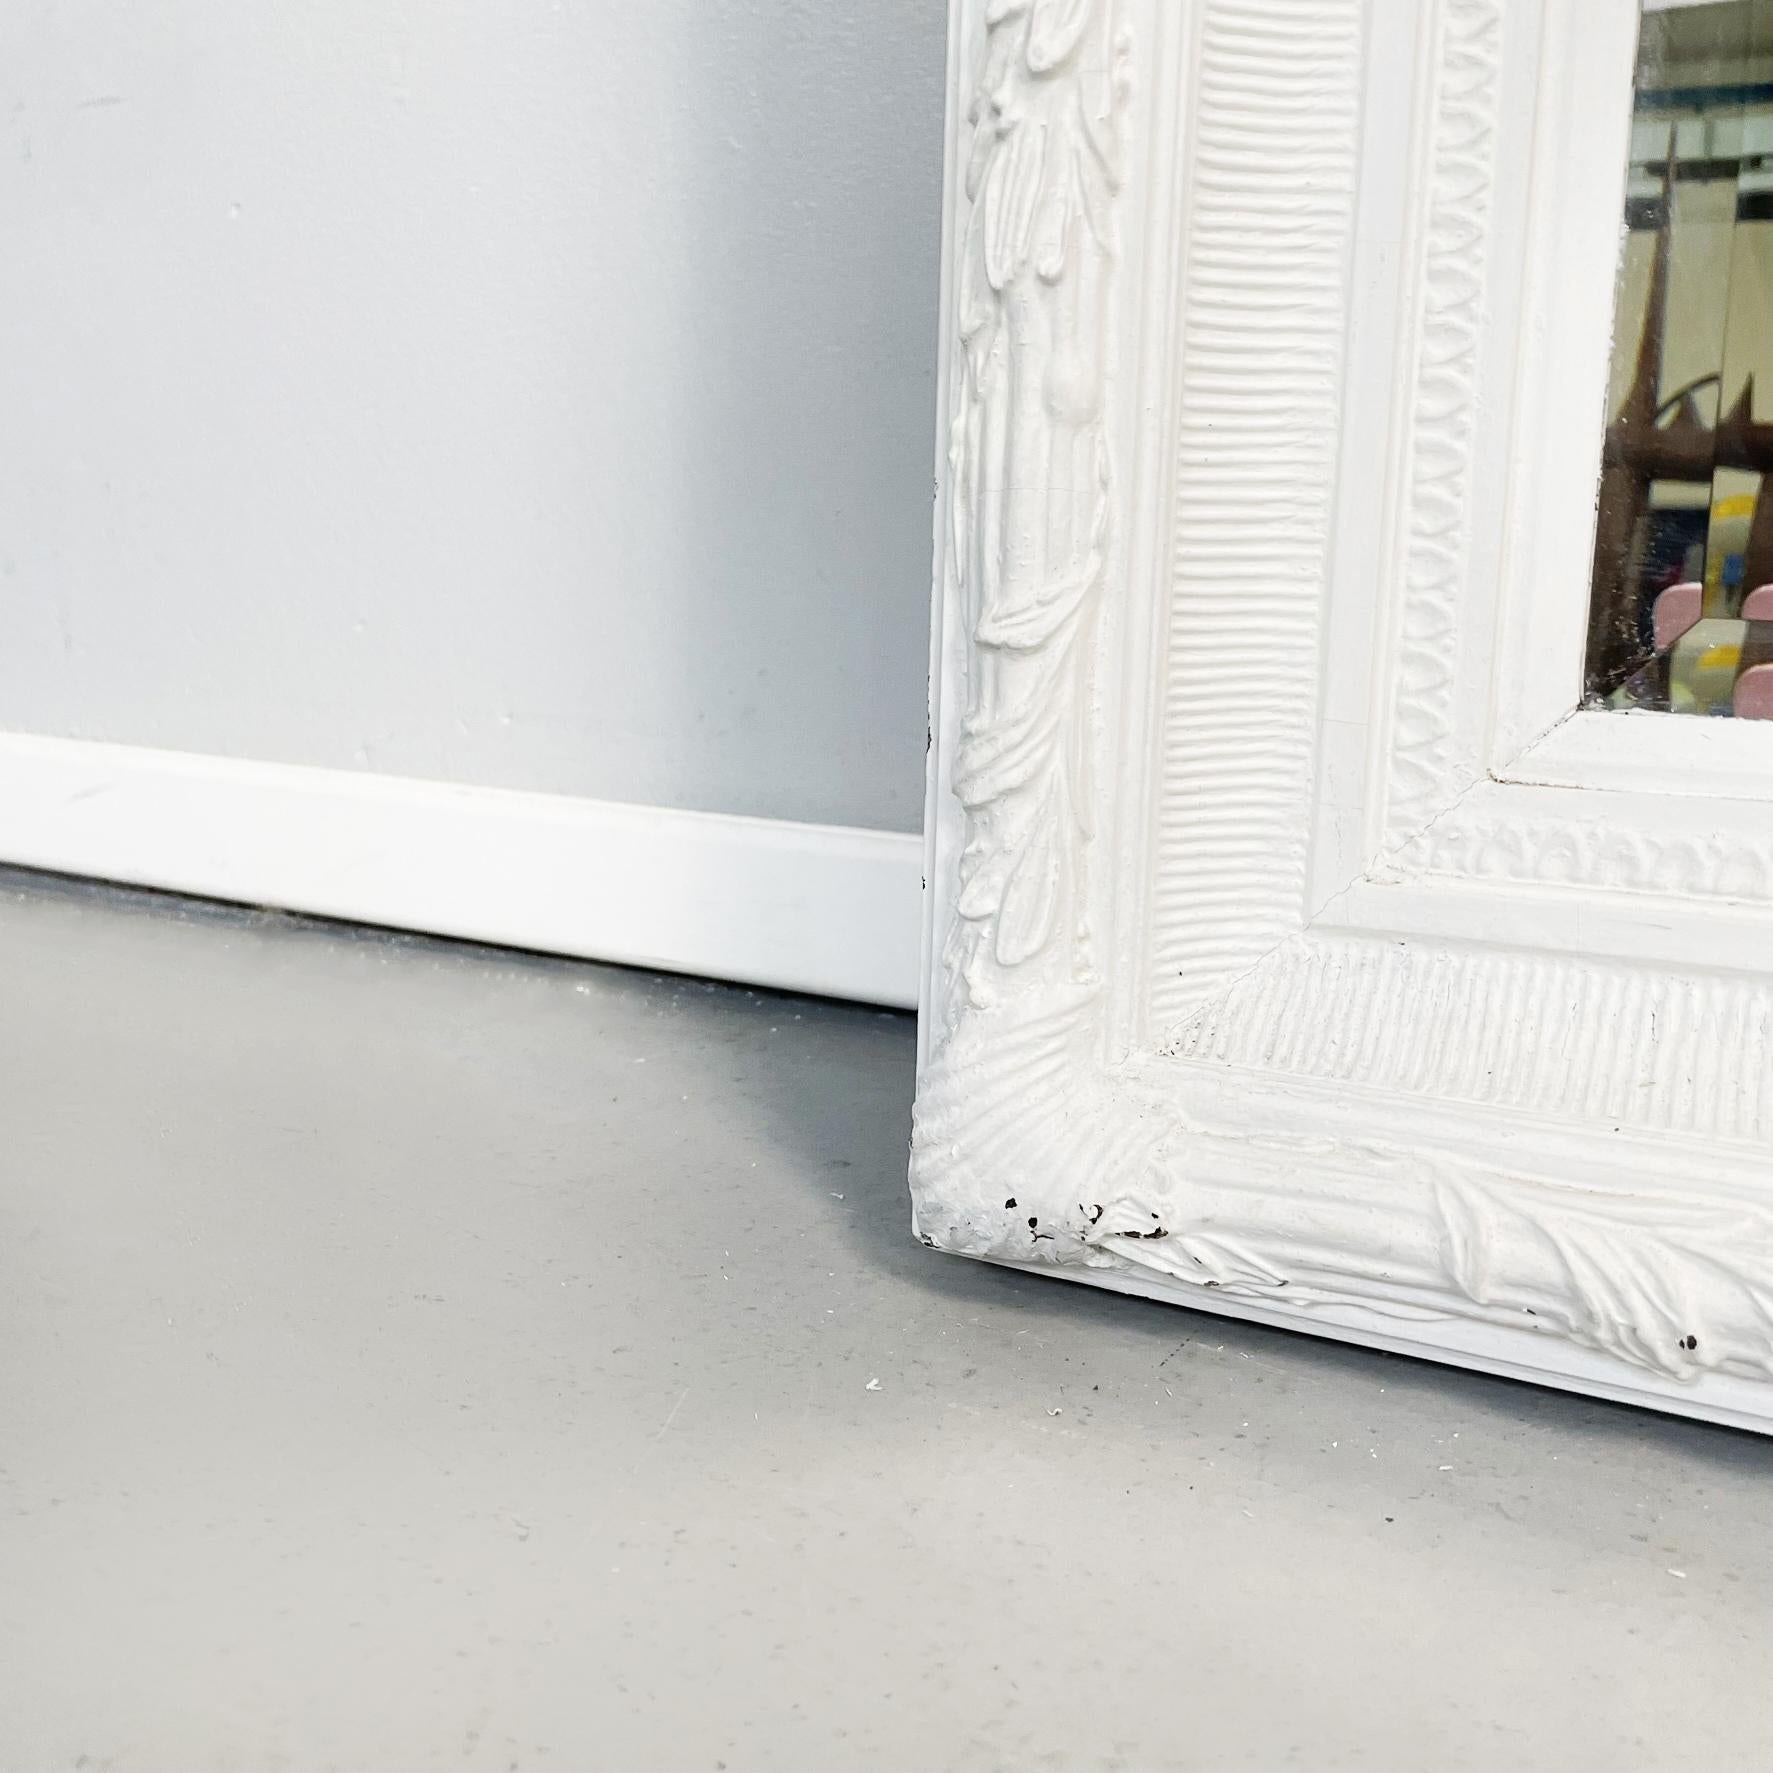 Italian Modern Large Rectangular Mirror with White Wooden Frame, 1990s For Sale 8